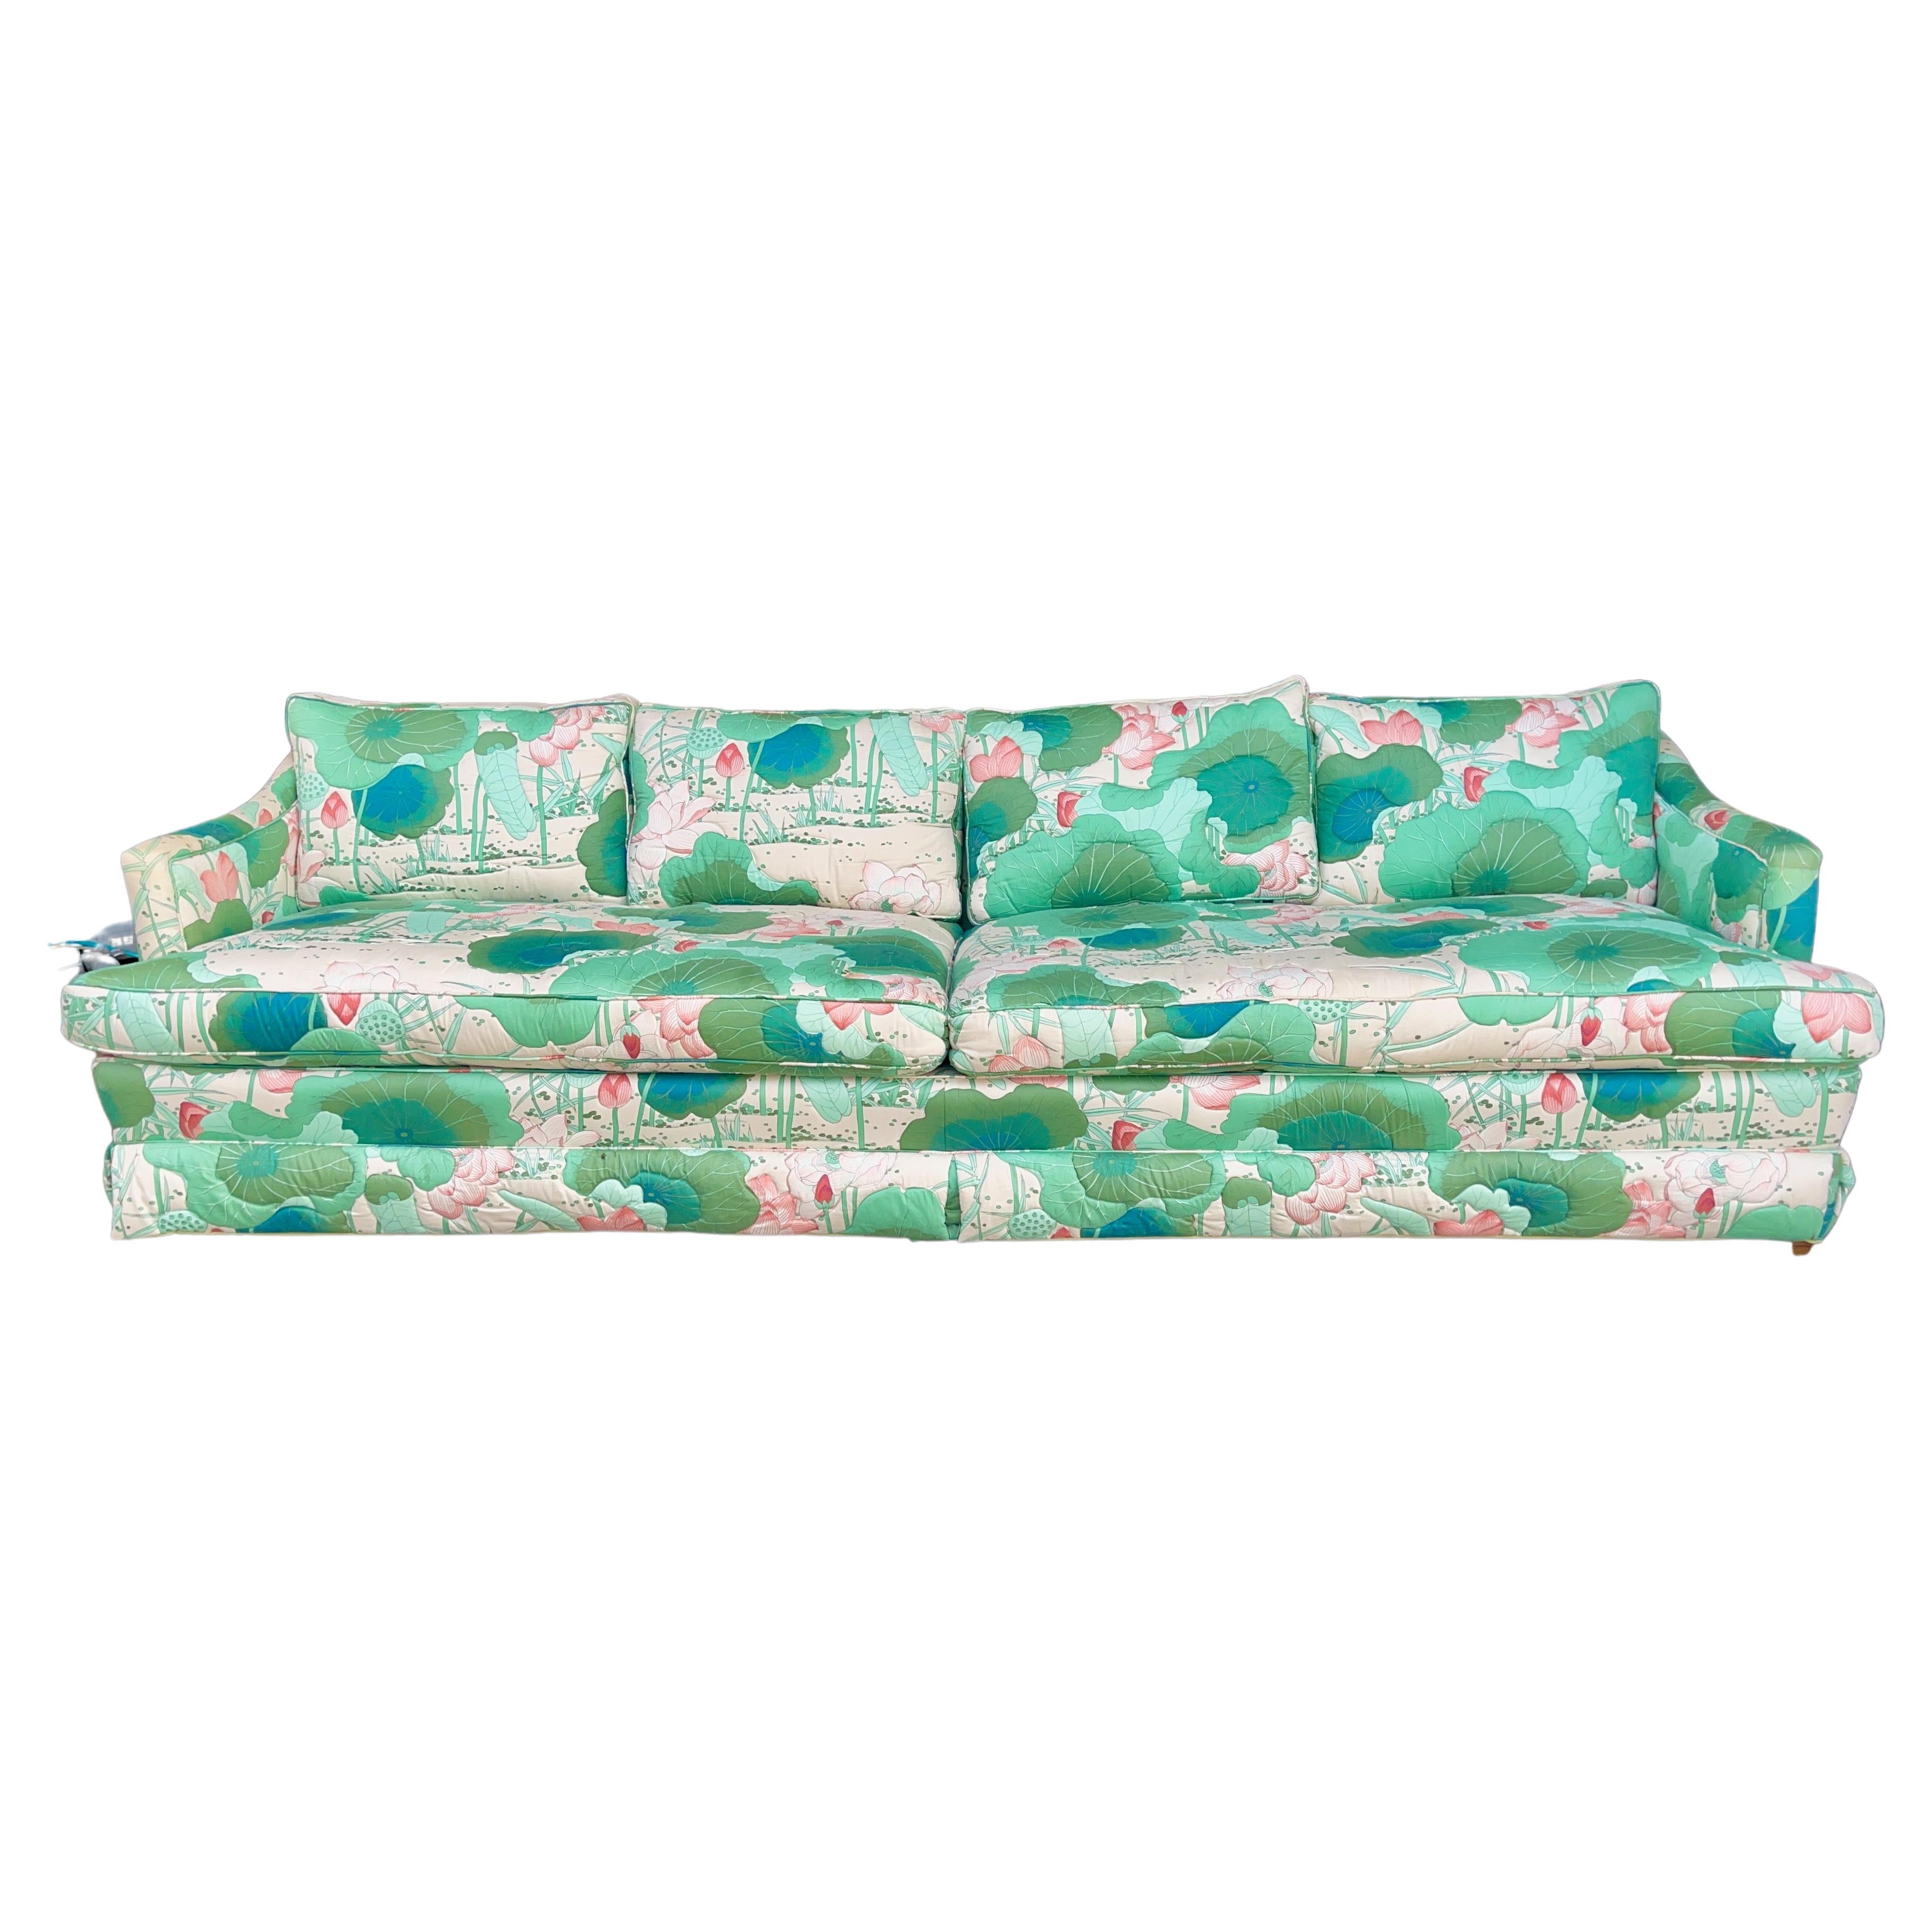 Vintage Quilted Lilly Pad Sofa For Sale